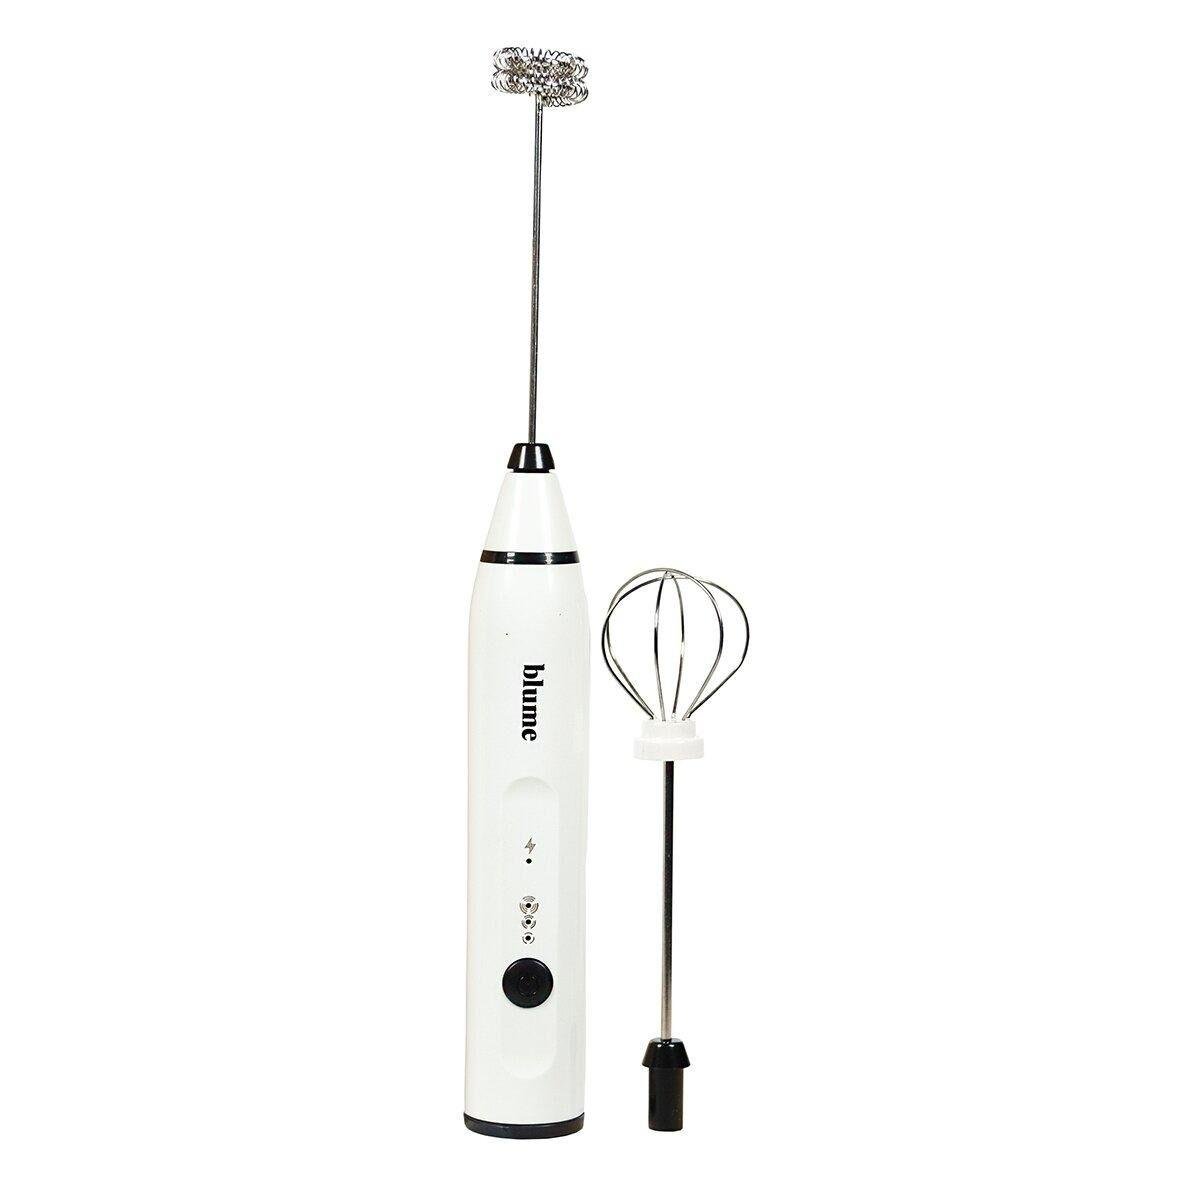 Blume Milk Frother White